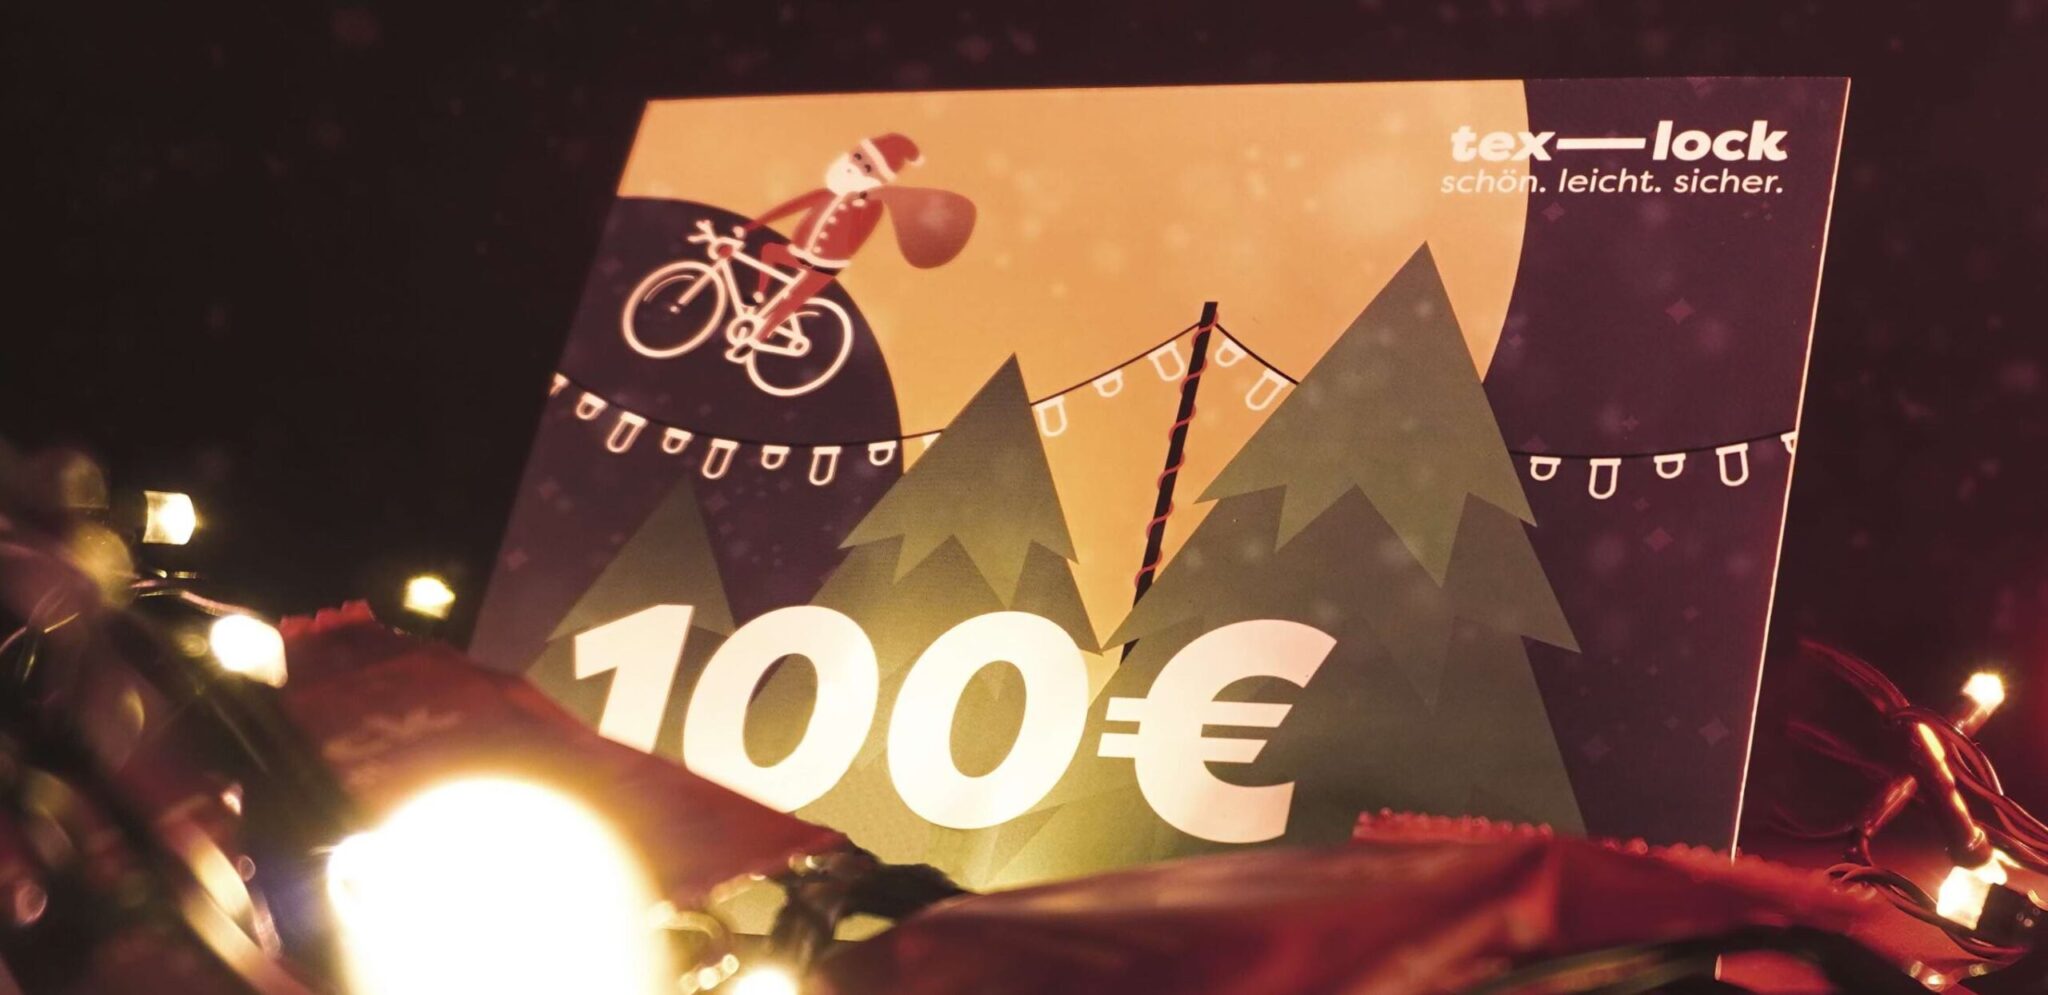 tex-lock Voucher for Christmas worth 100€